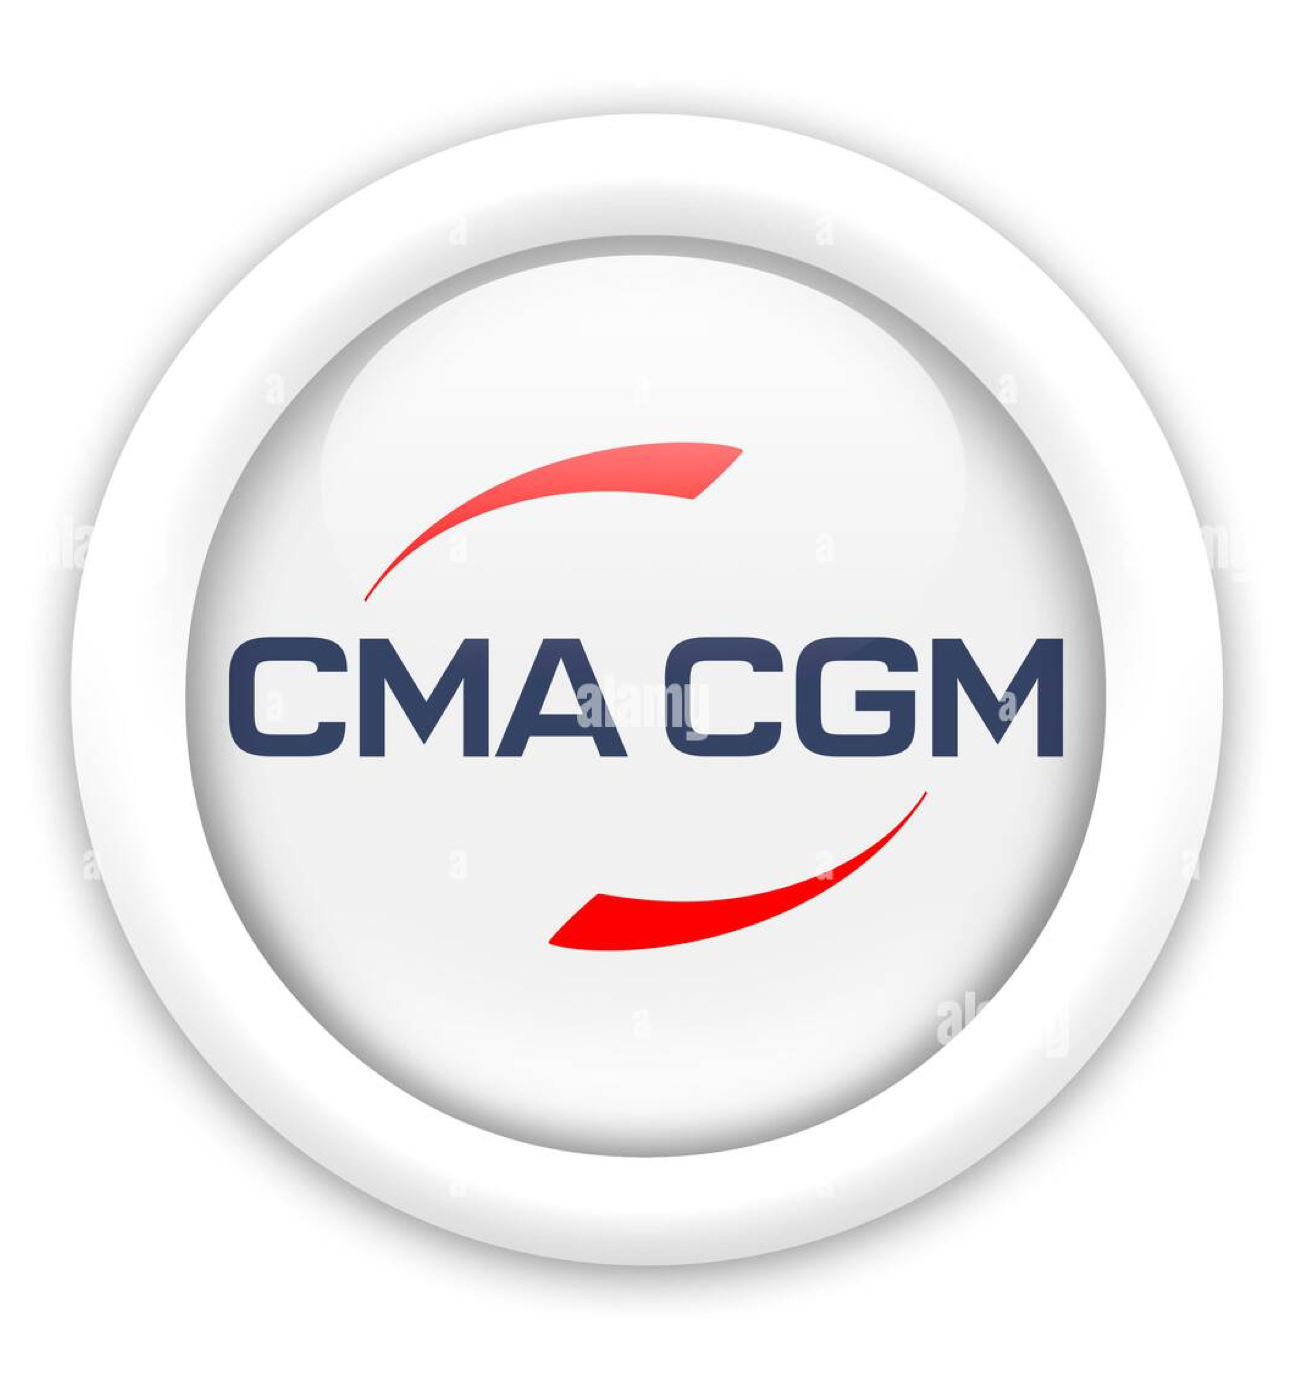 /img/icons/common/cma1.png